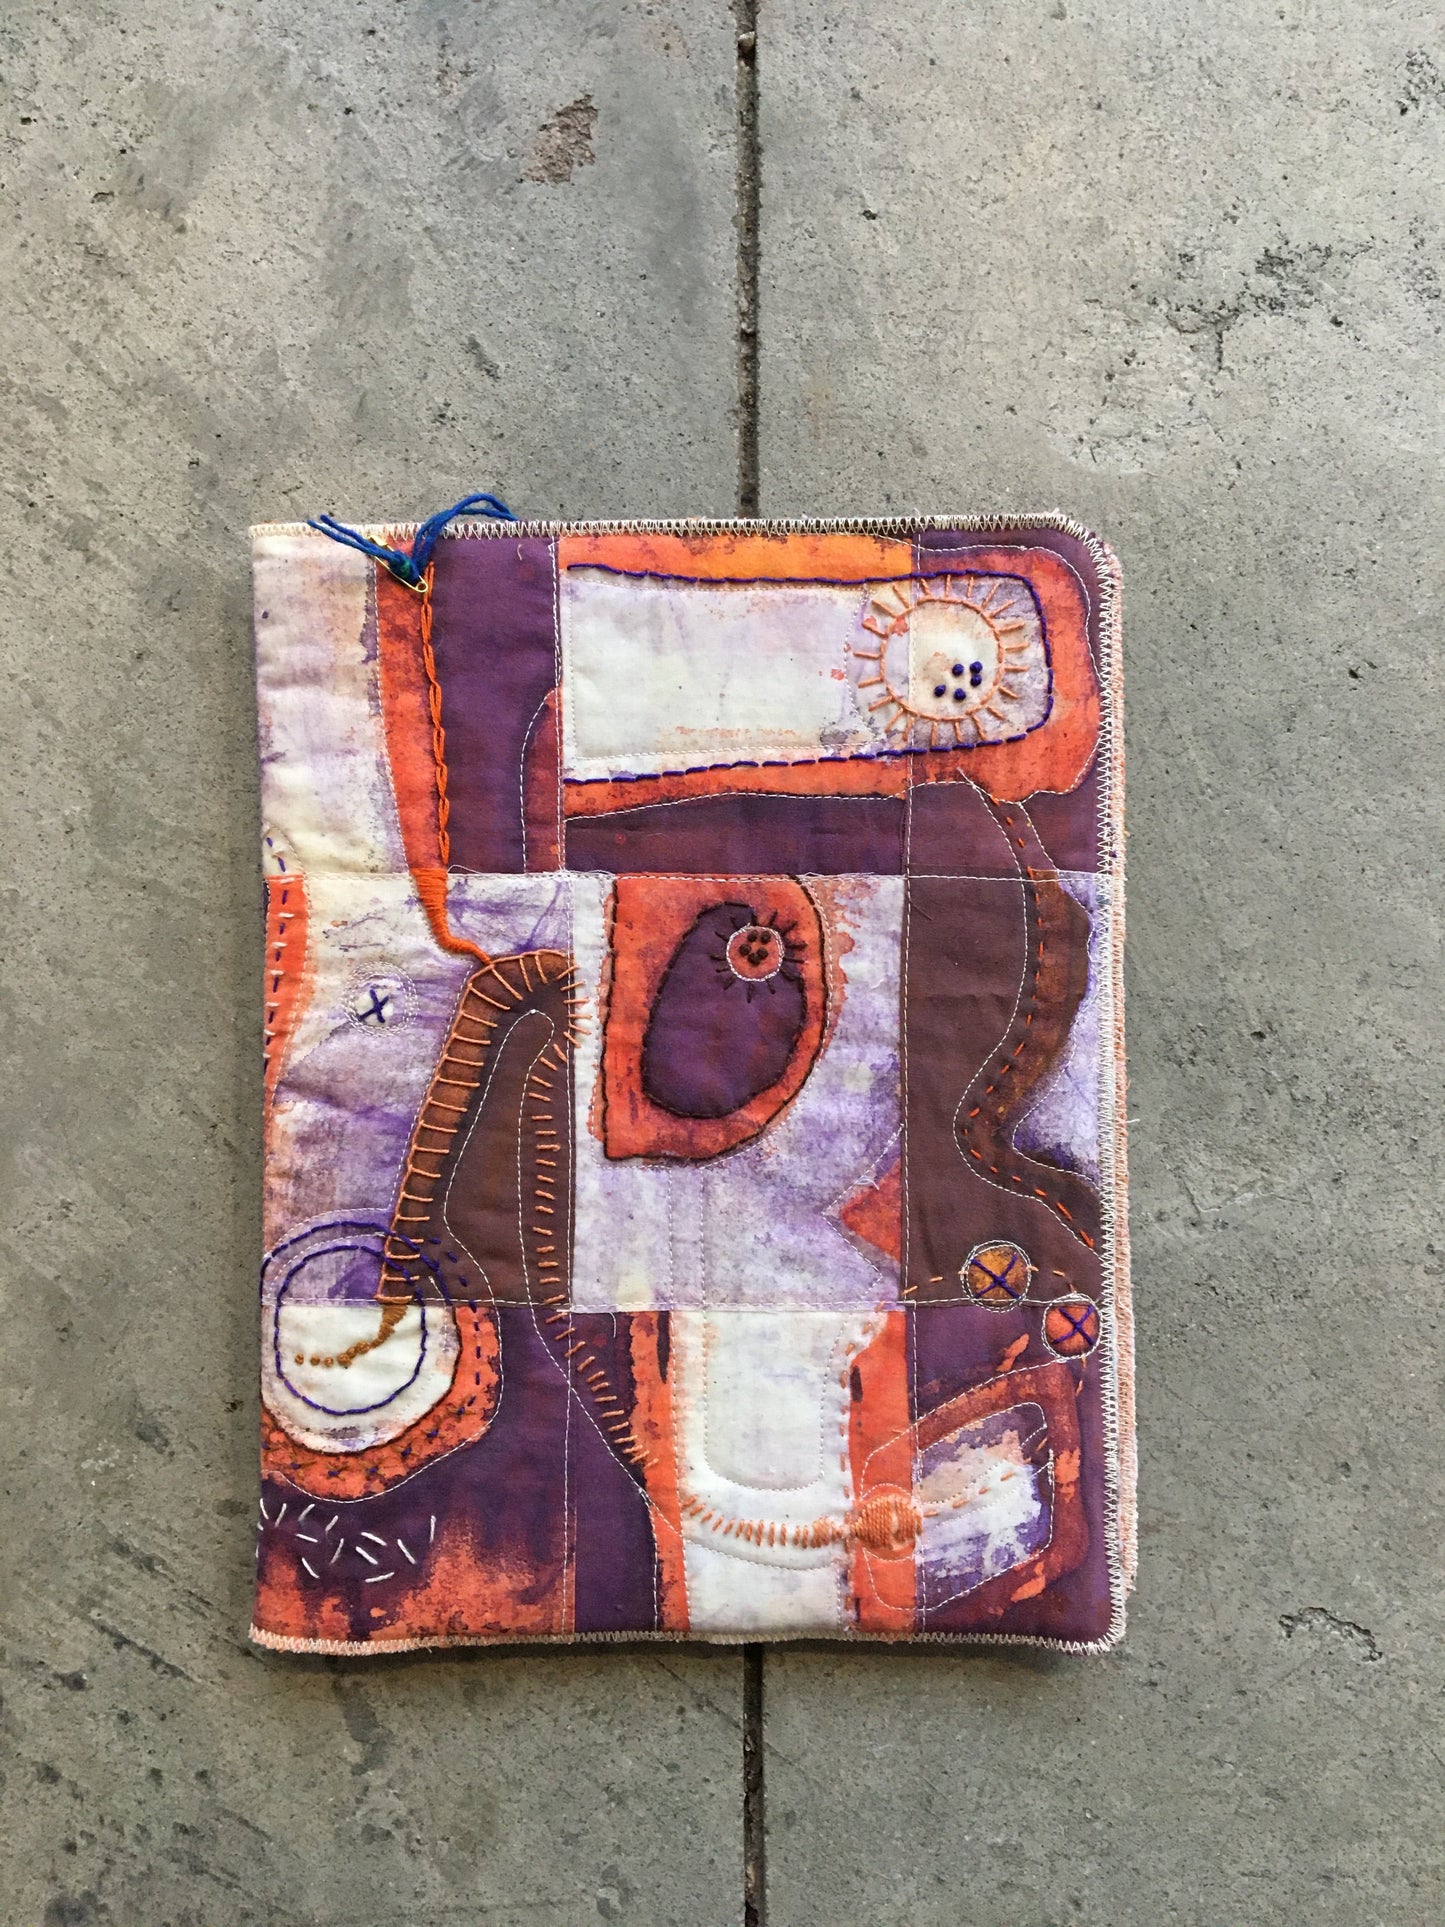 Fabric Covered Journals